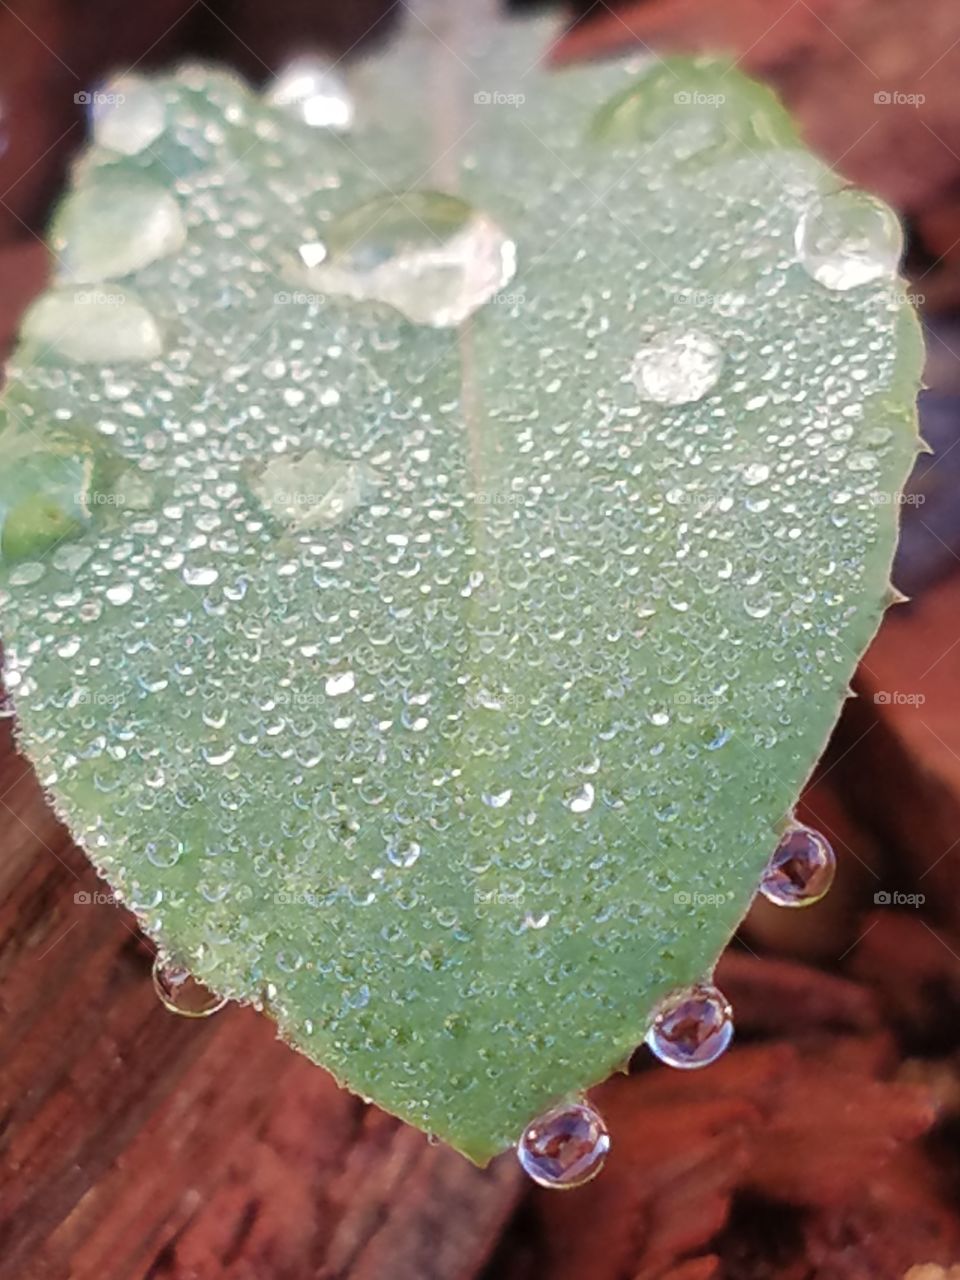 Dew on weed